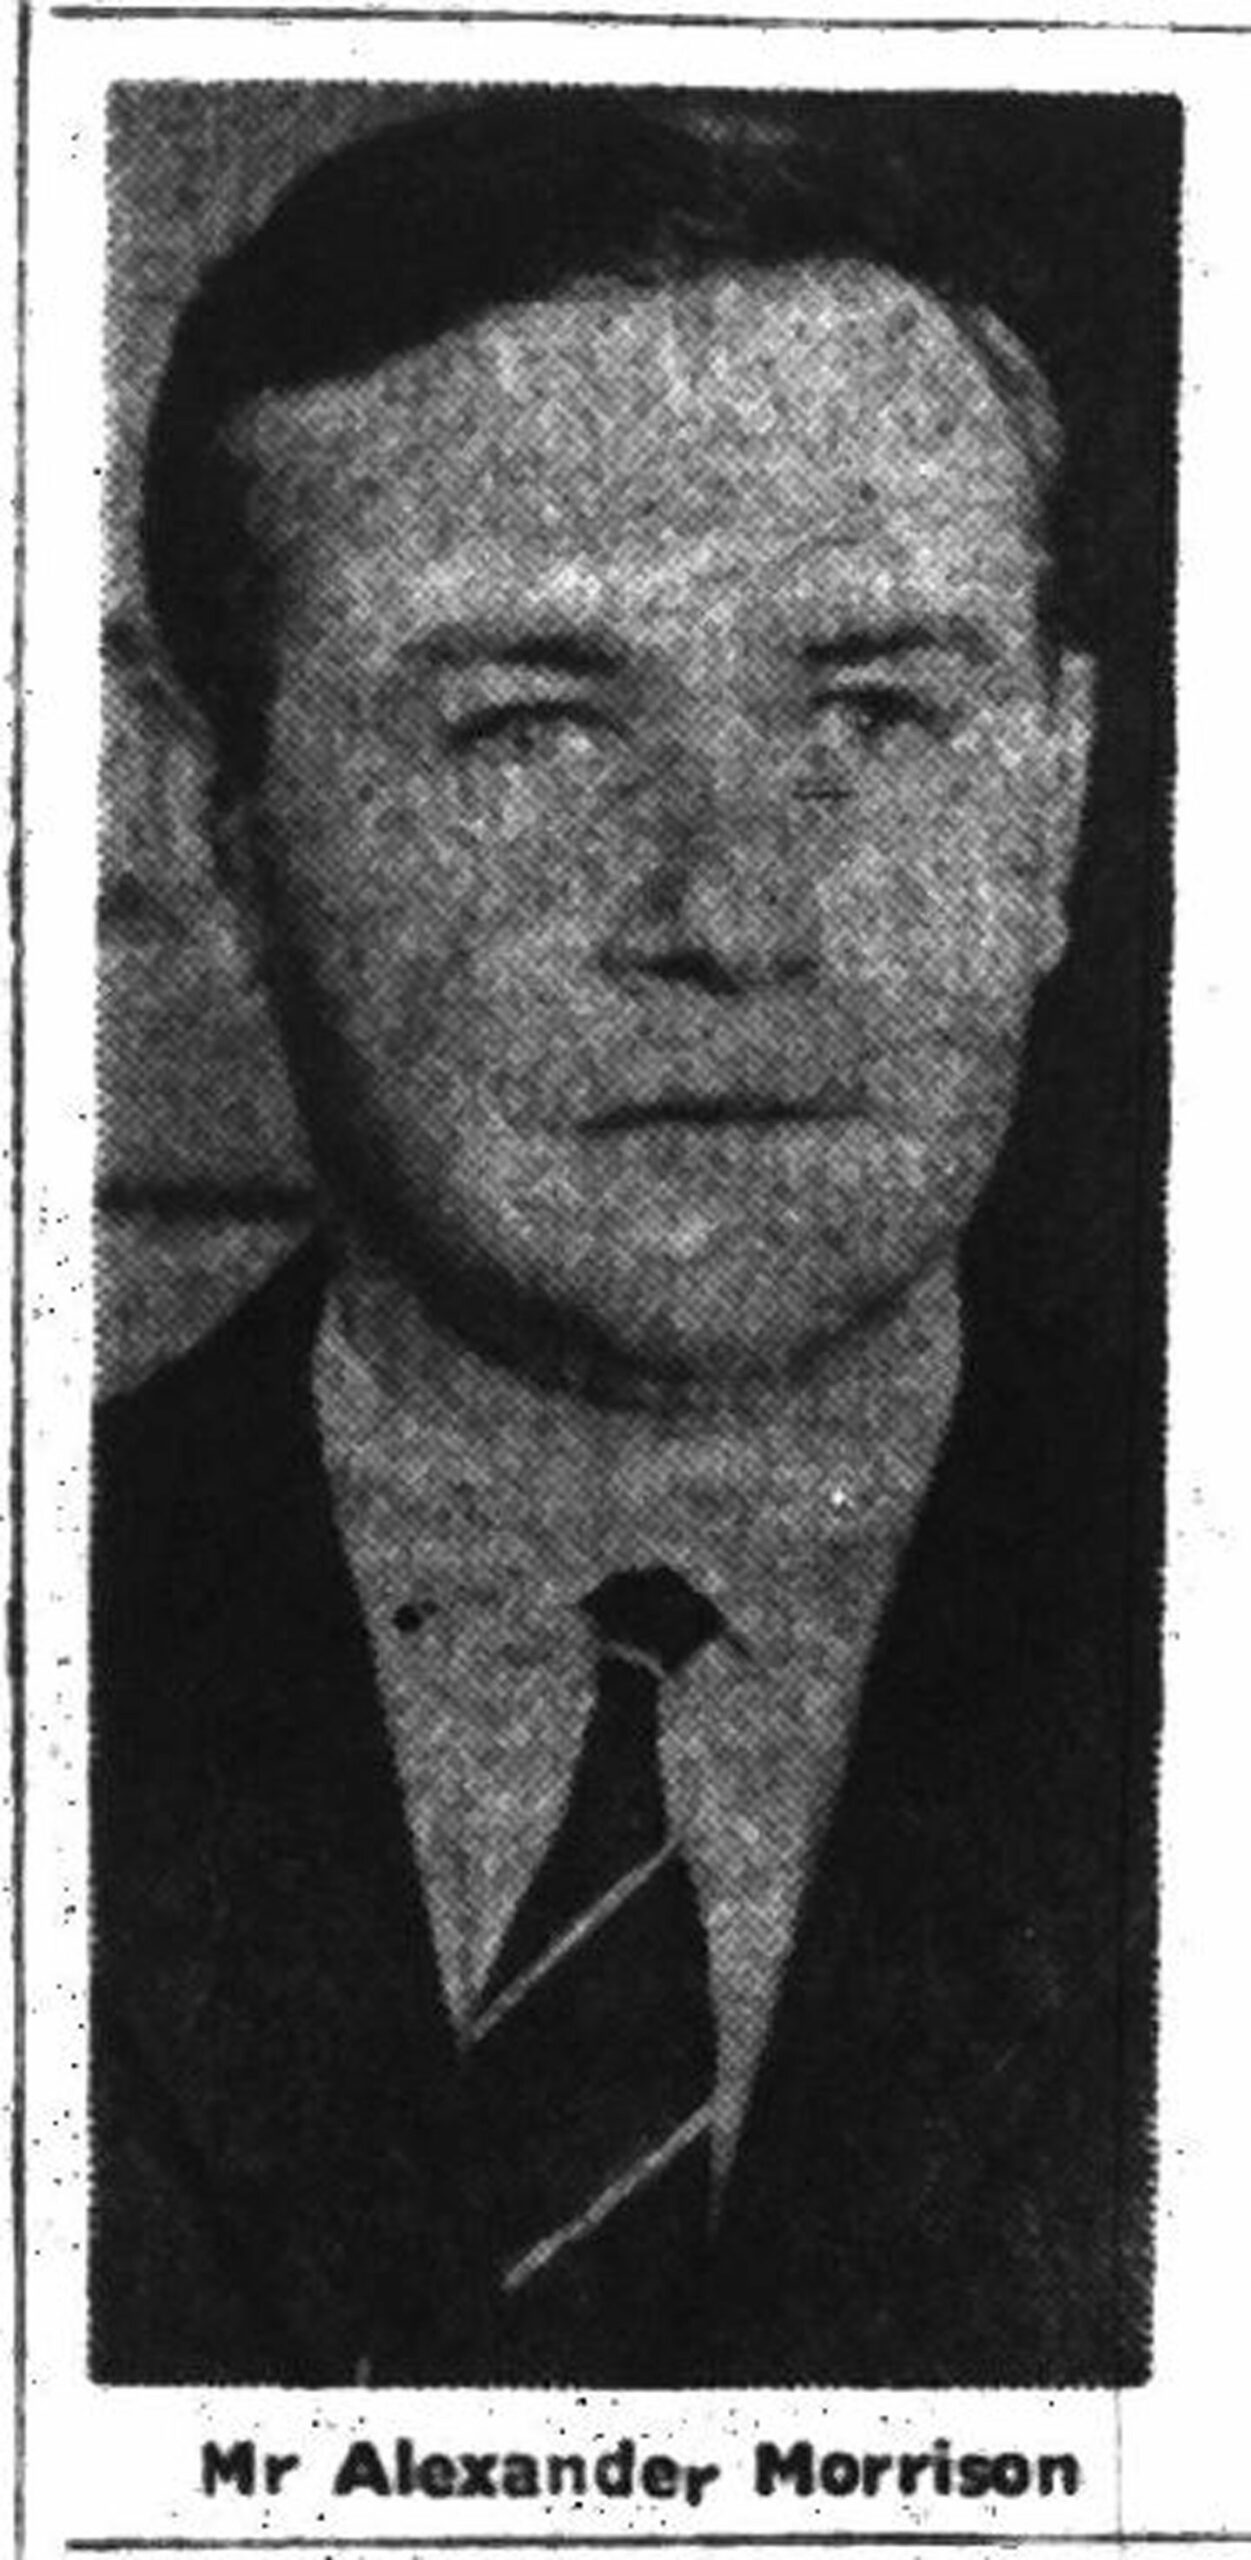 An image of Chief Constable Alexander Morrison in the paper